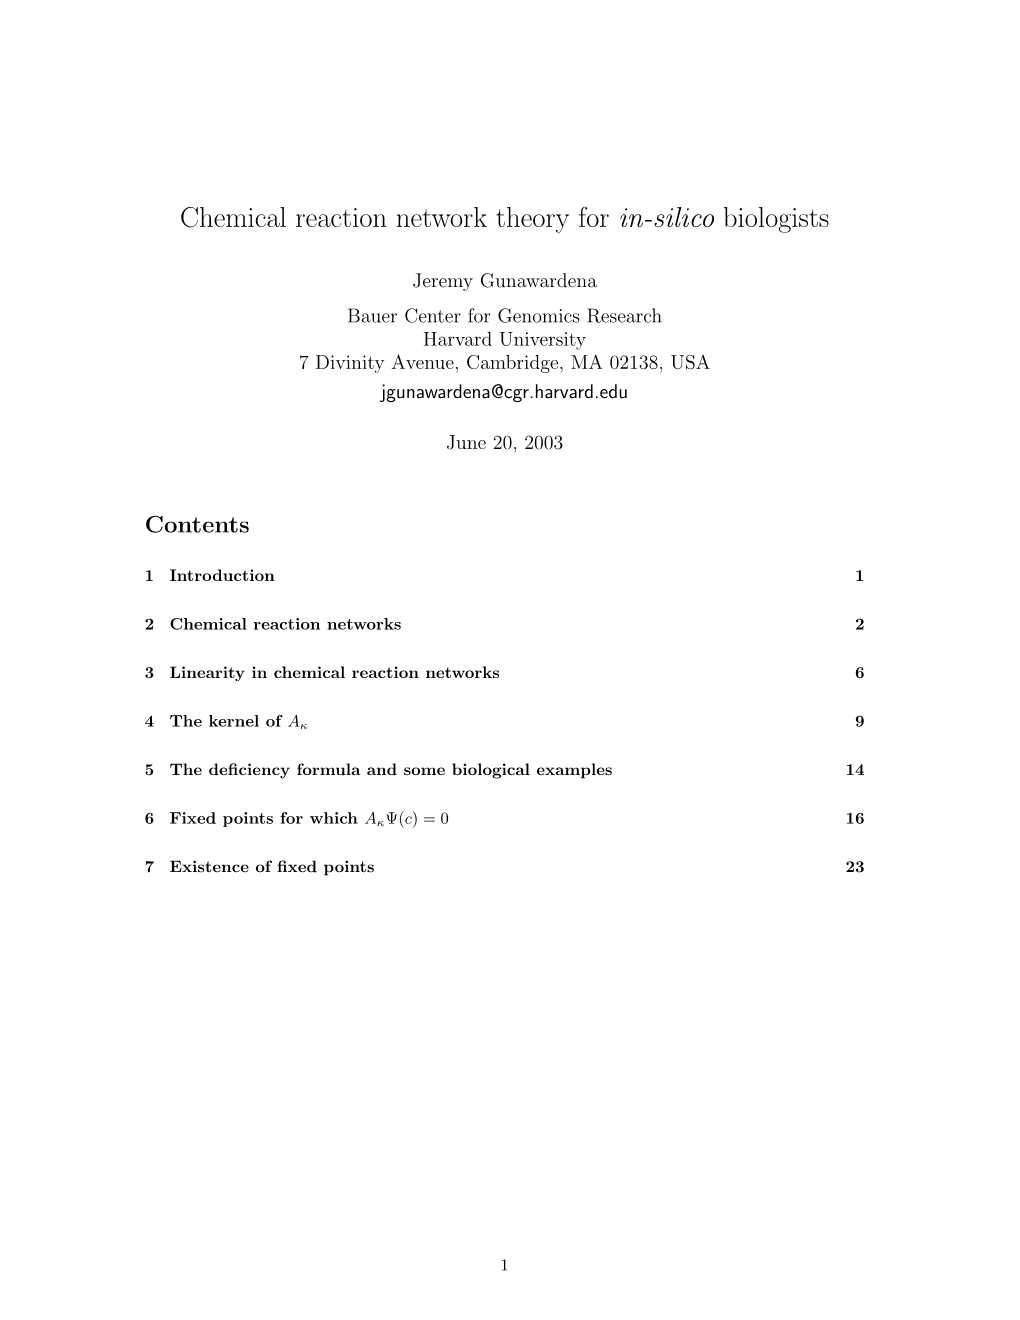 Chemical Reaction Network Theory for In-Silico Biologists